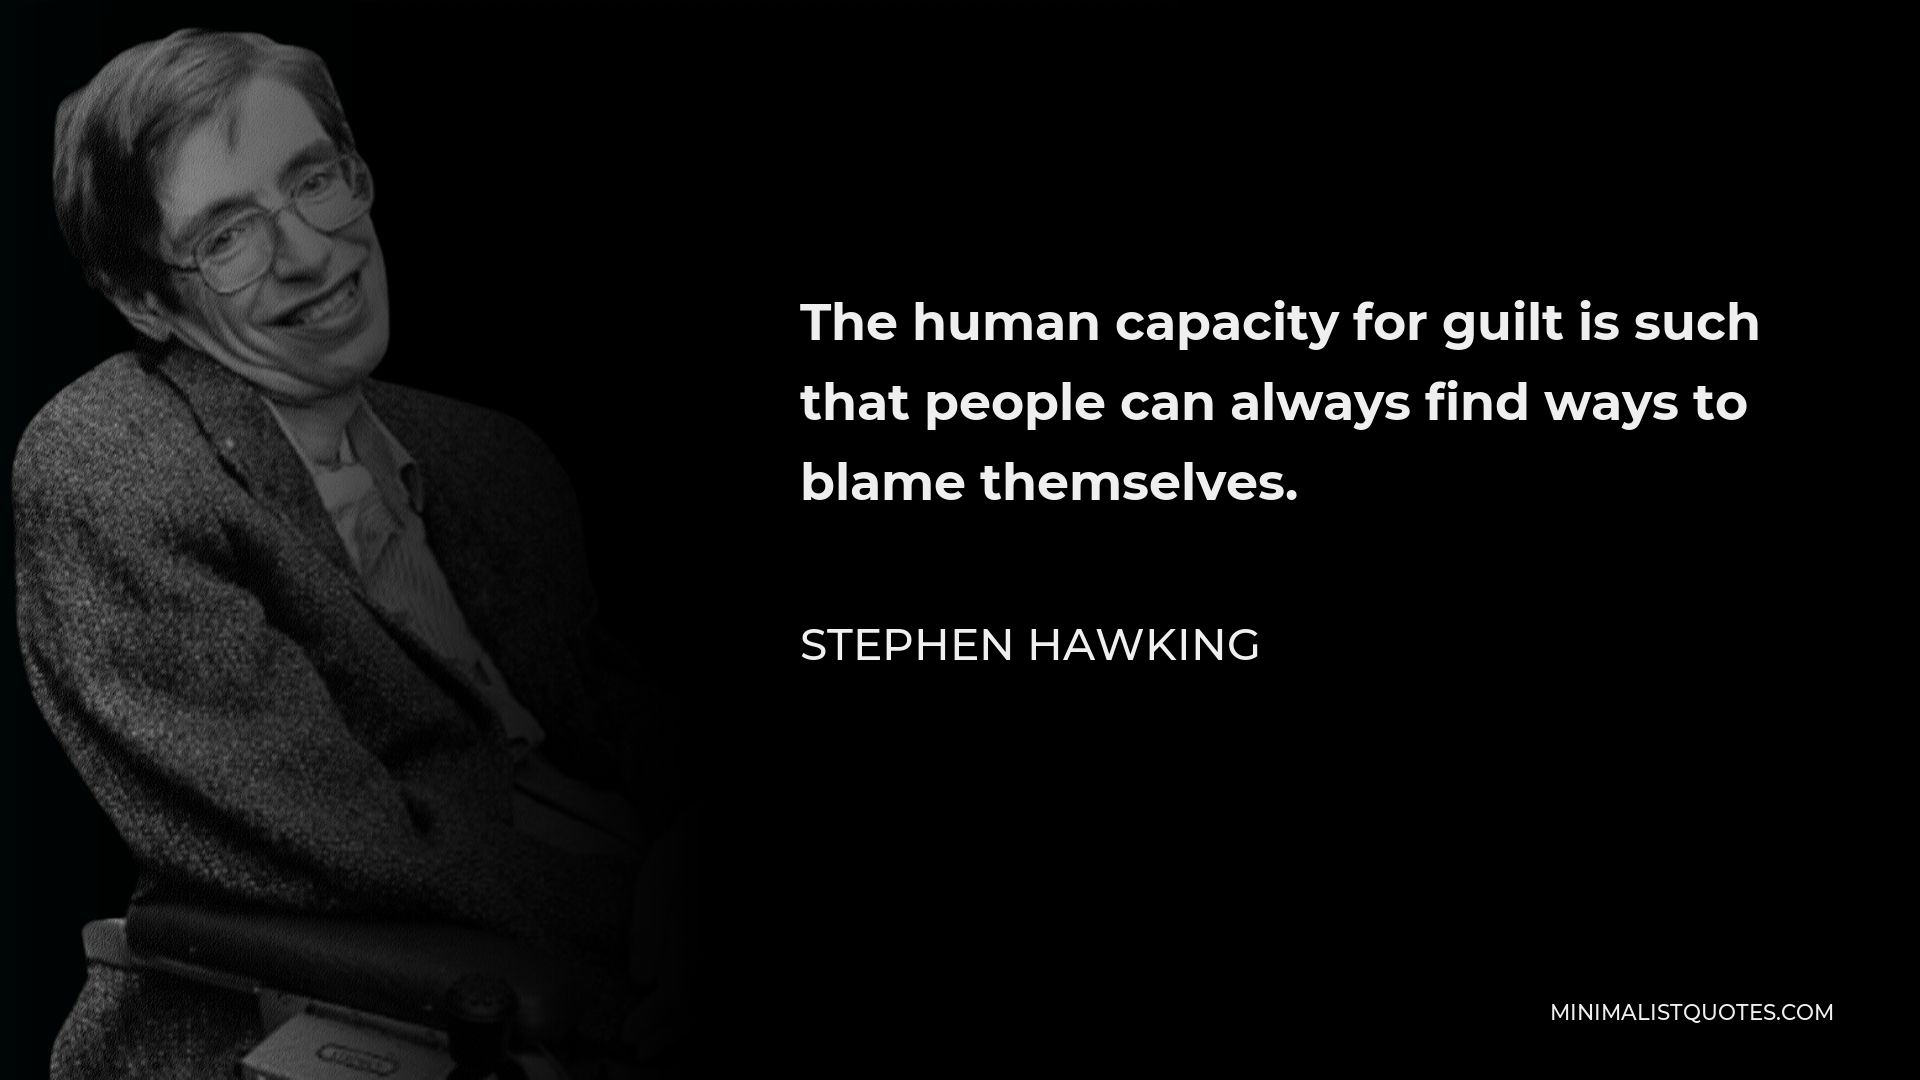 Stephen Hawking Quote - The human capacity for guilt is such that people can always find ways to blame themselves.